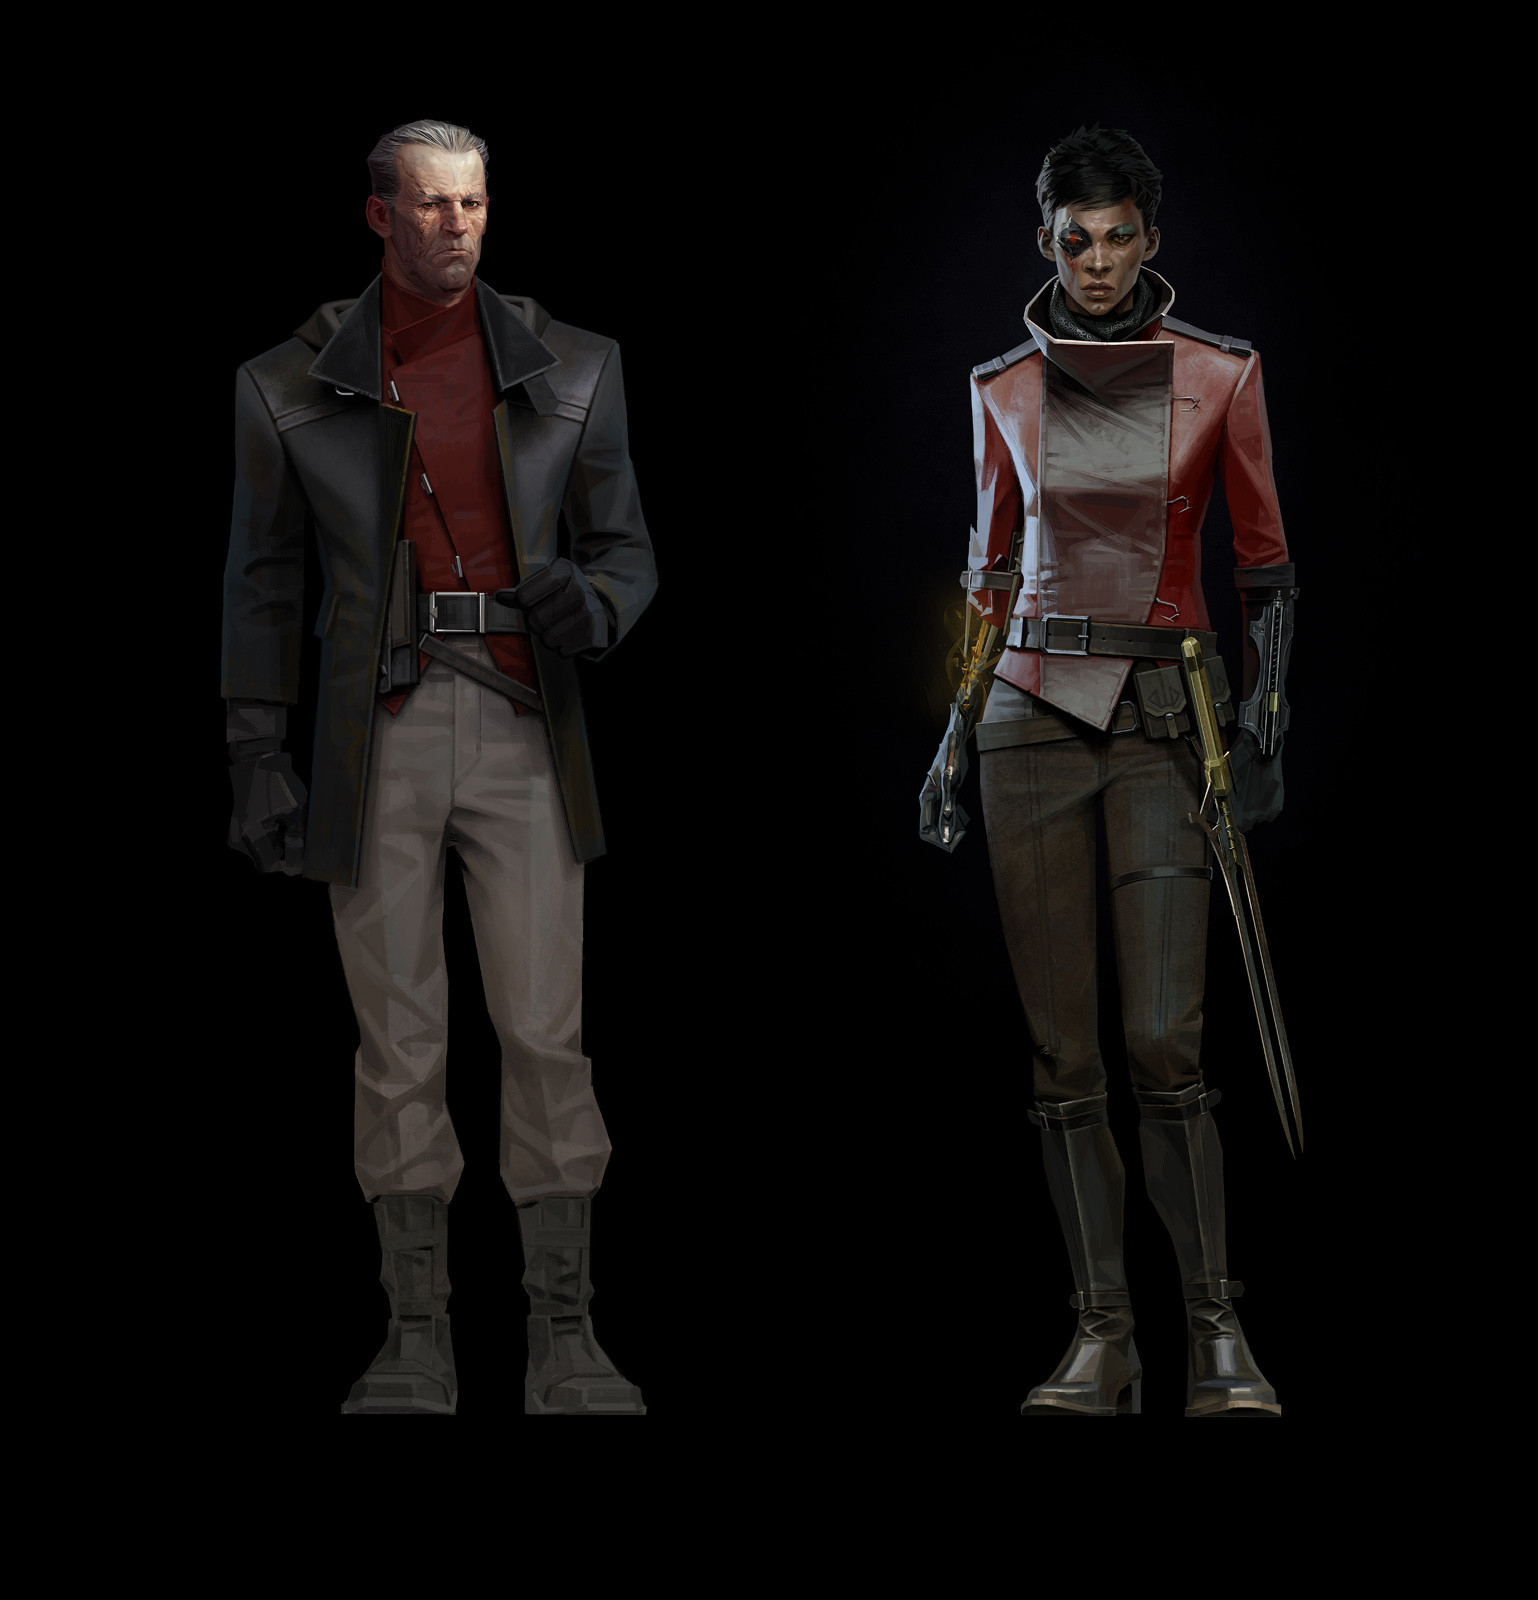 Daud and Billie's outfit